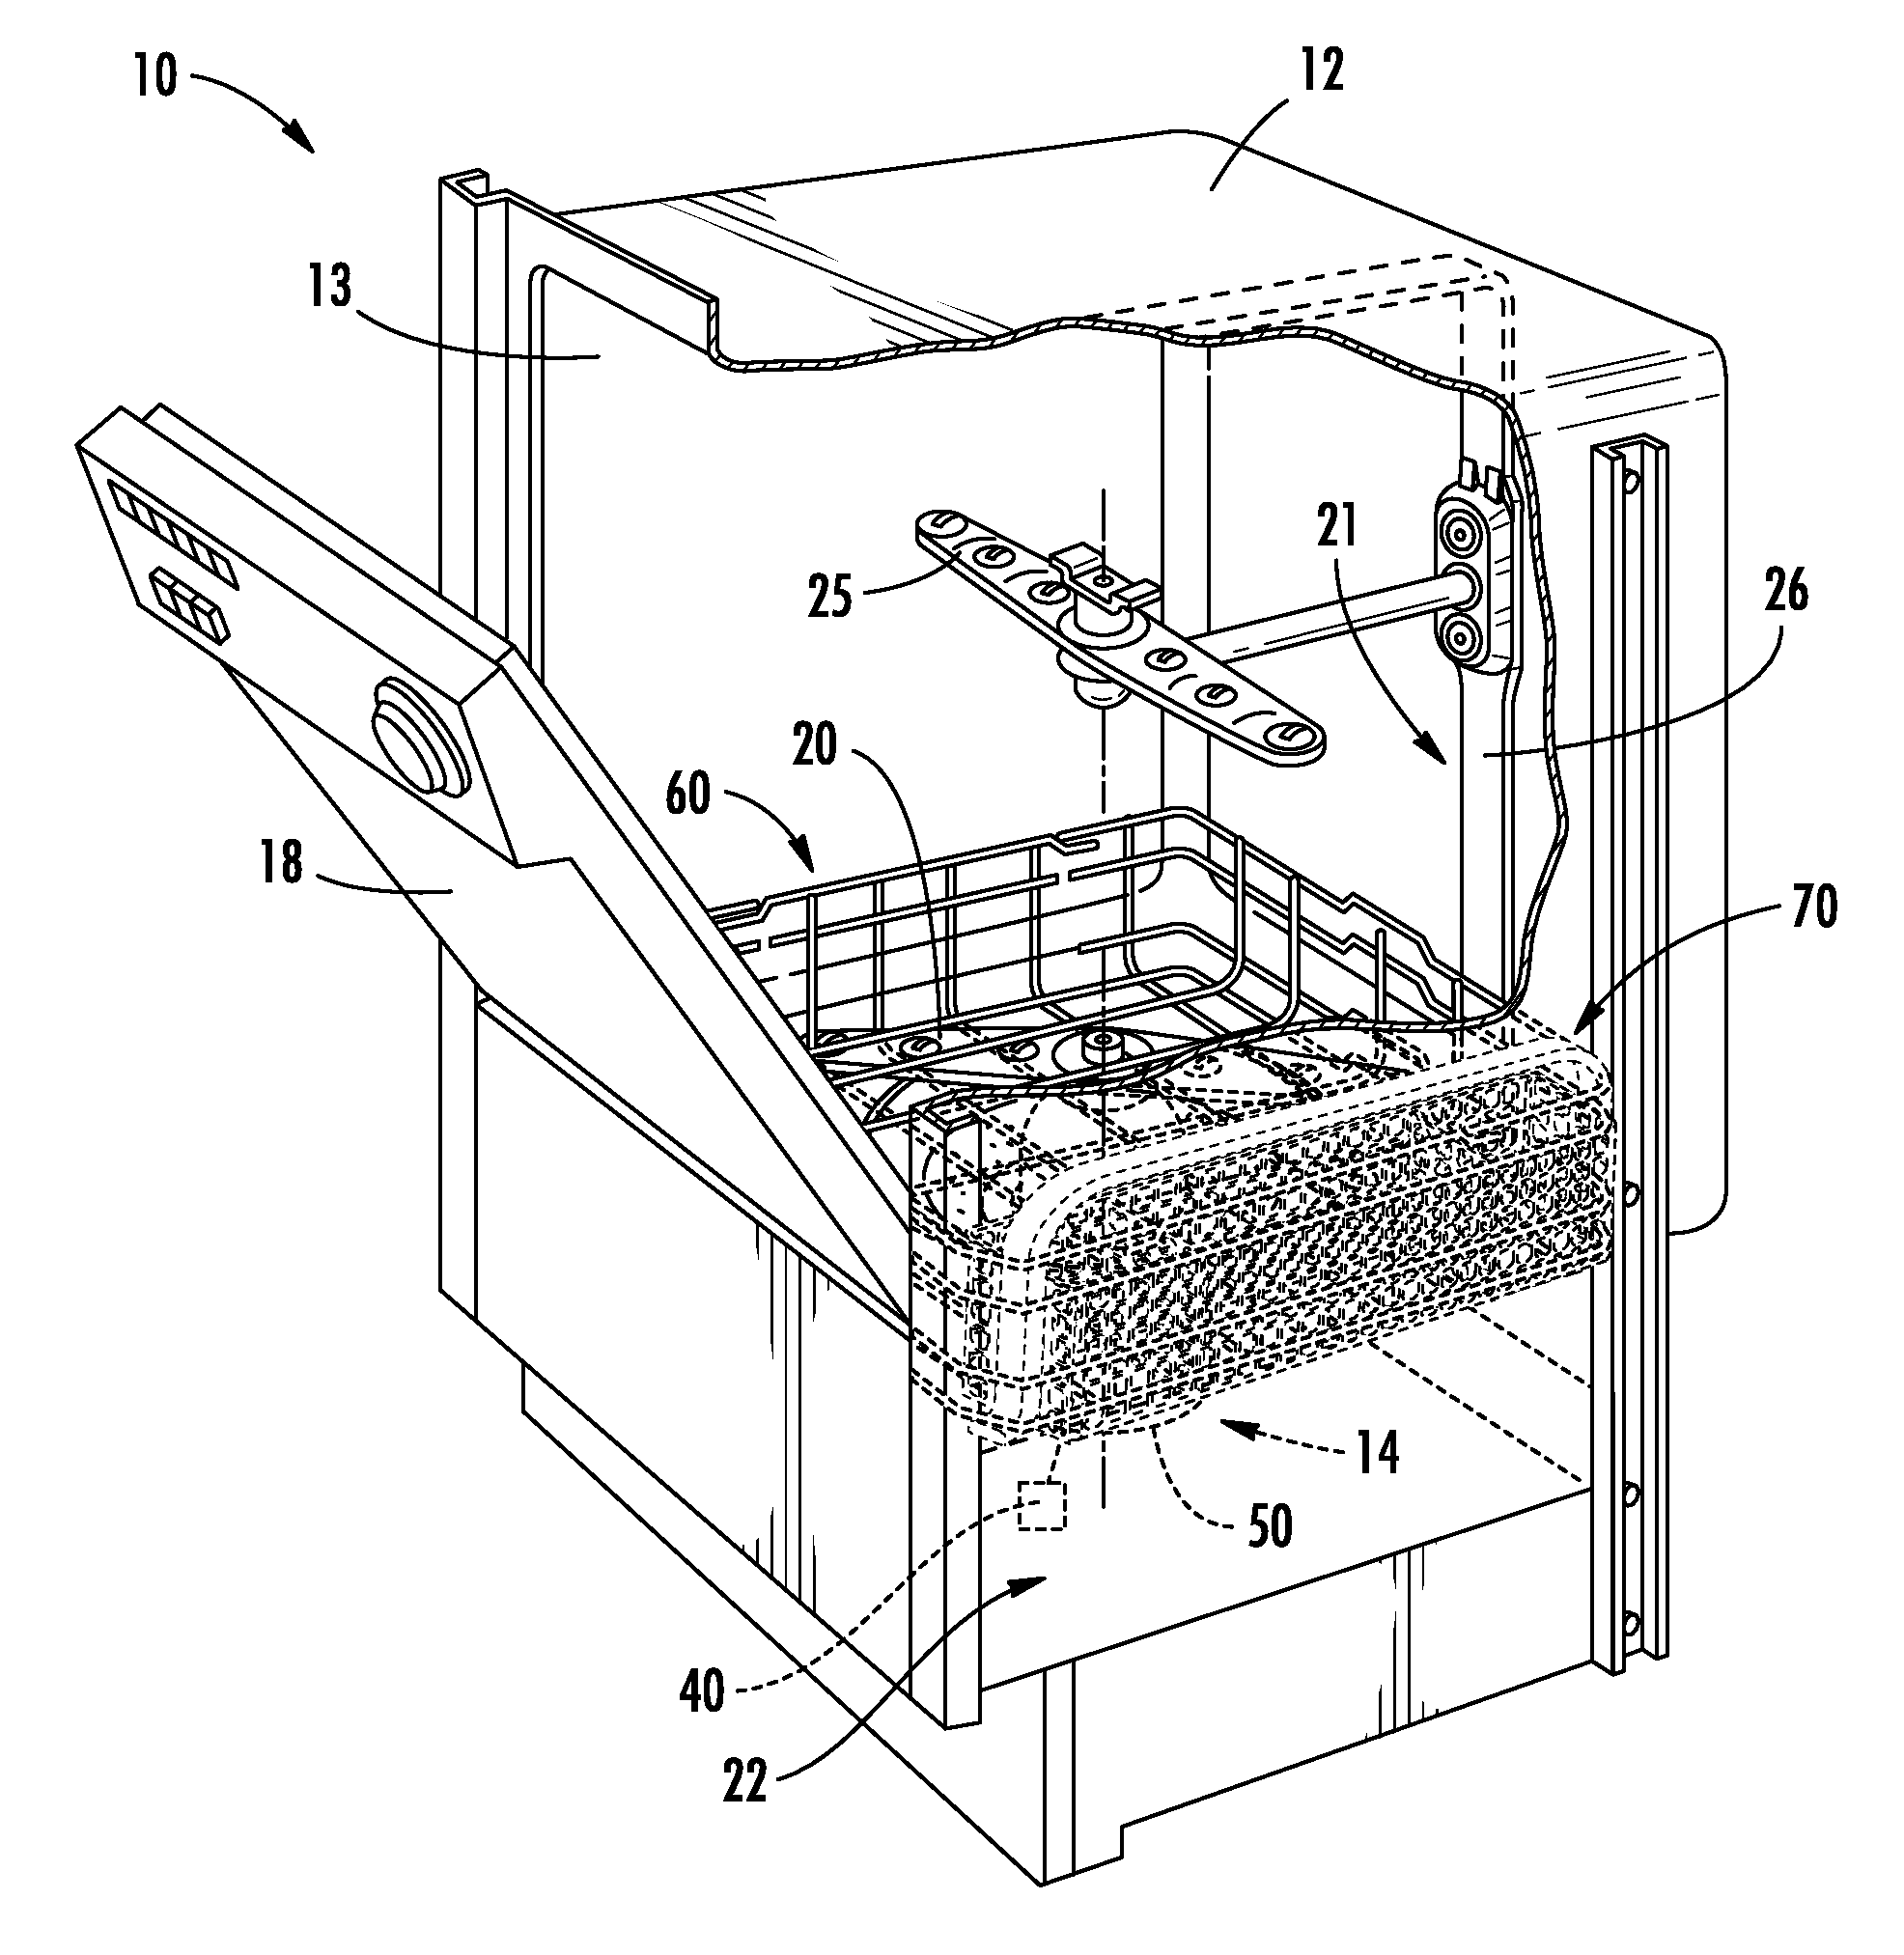 Silverware basket with integral spray jets for a dishwasher